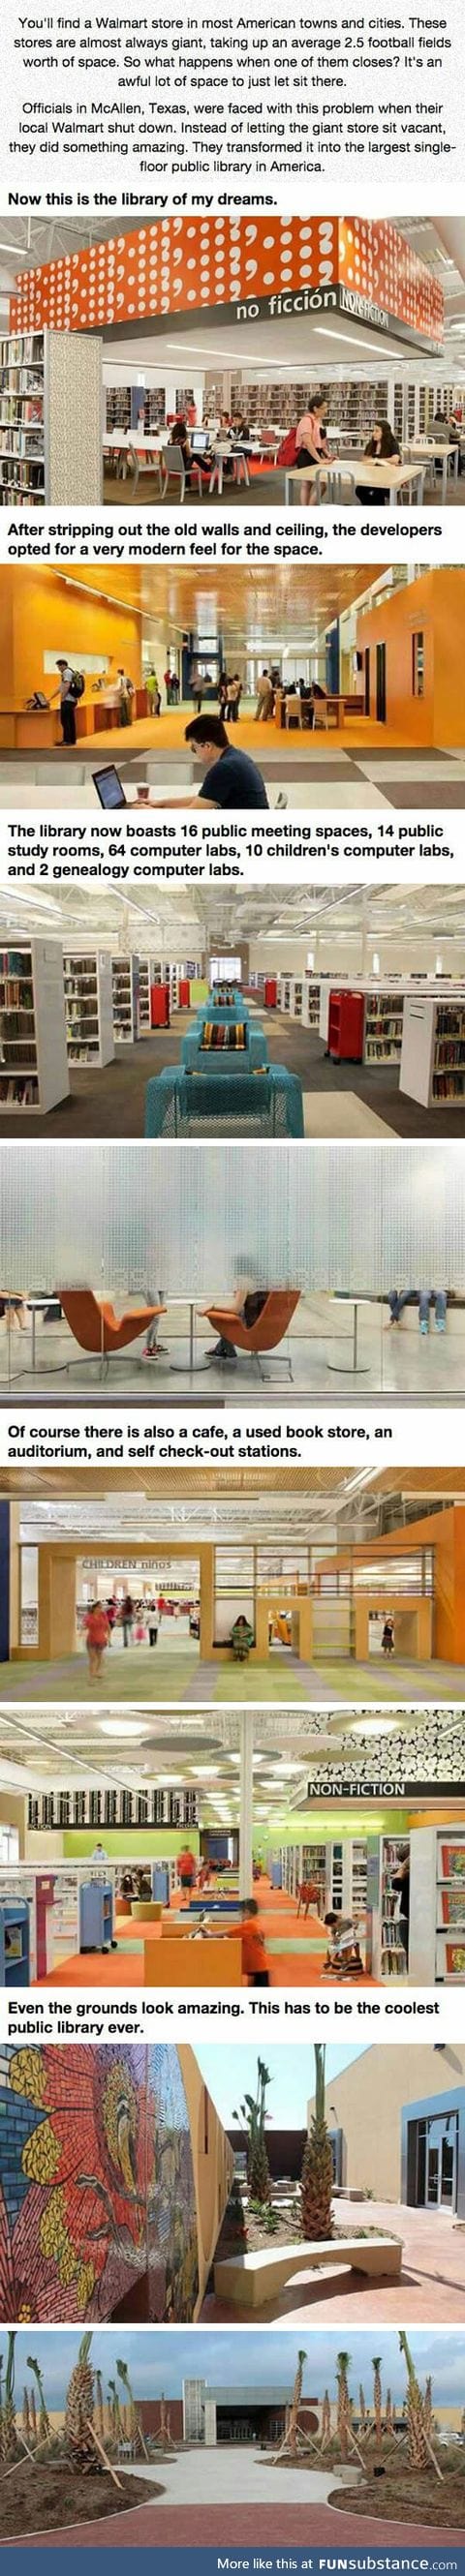 The library of my dreams